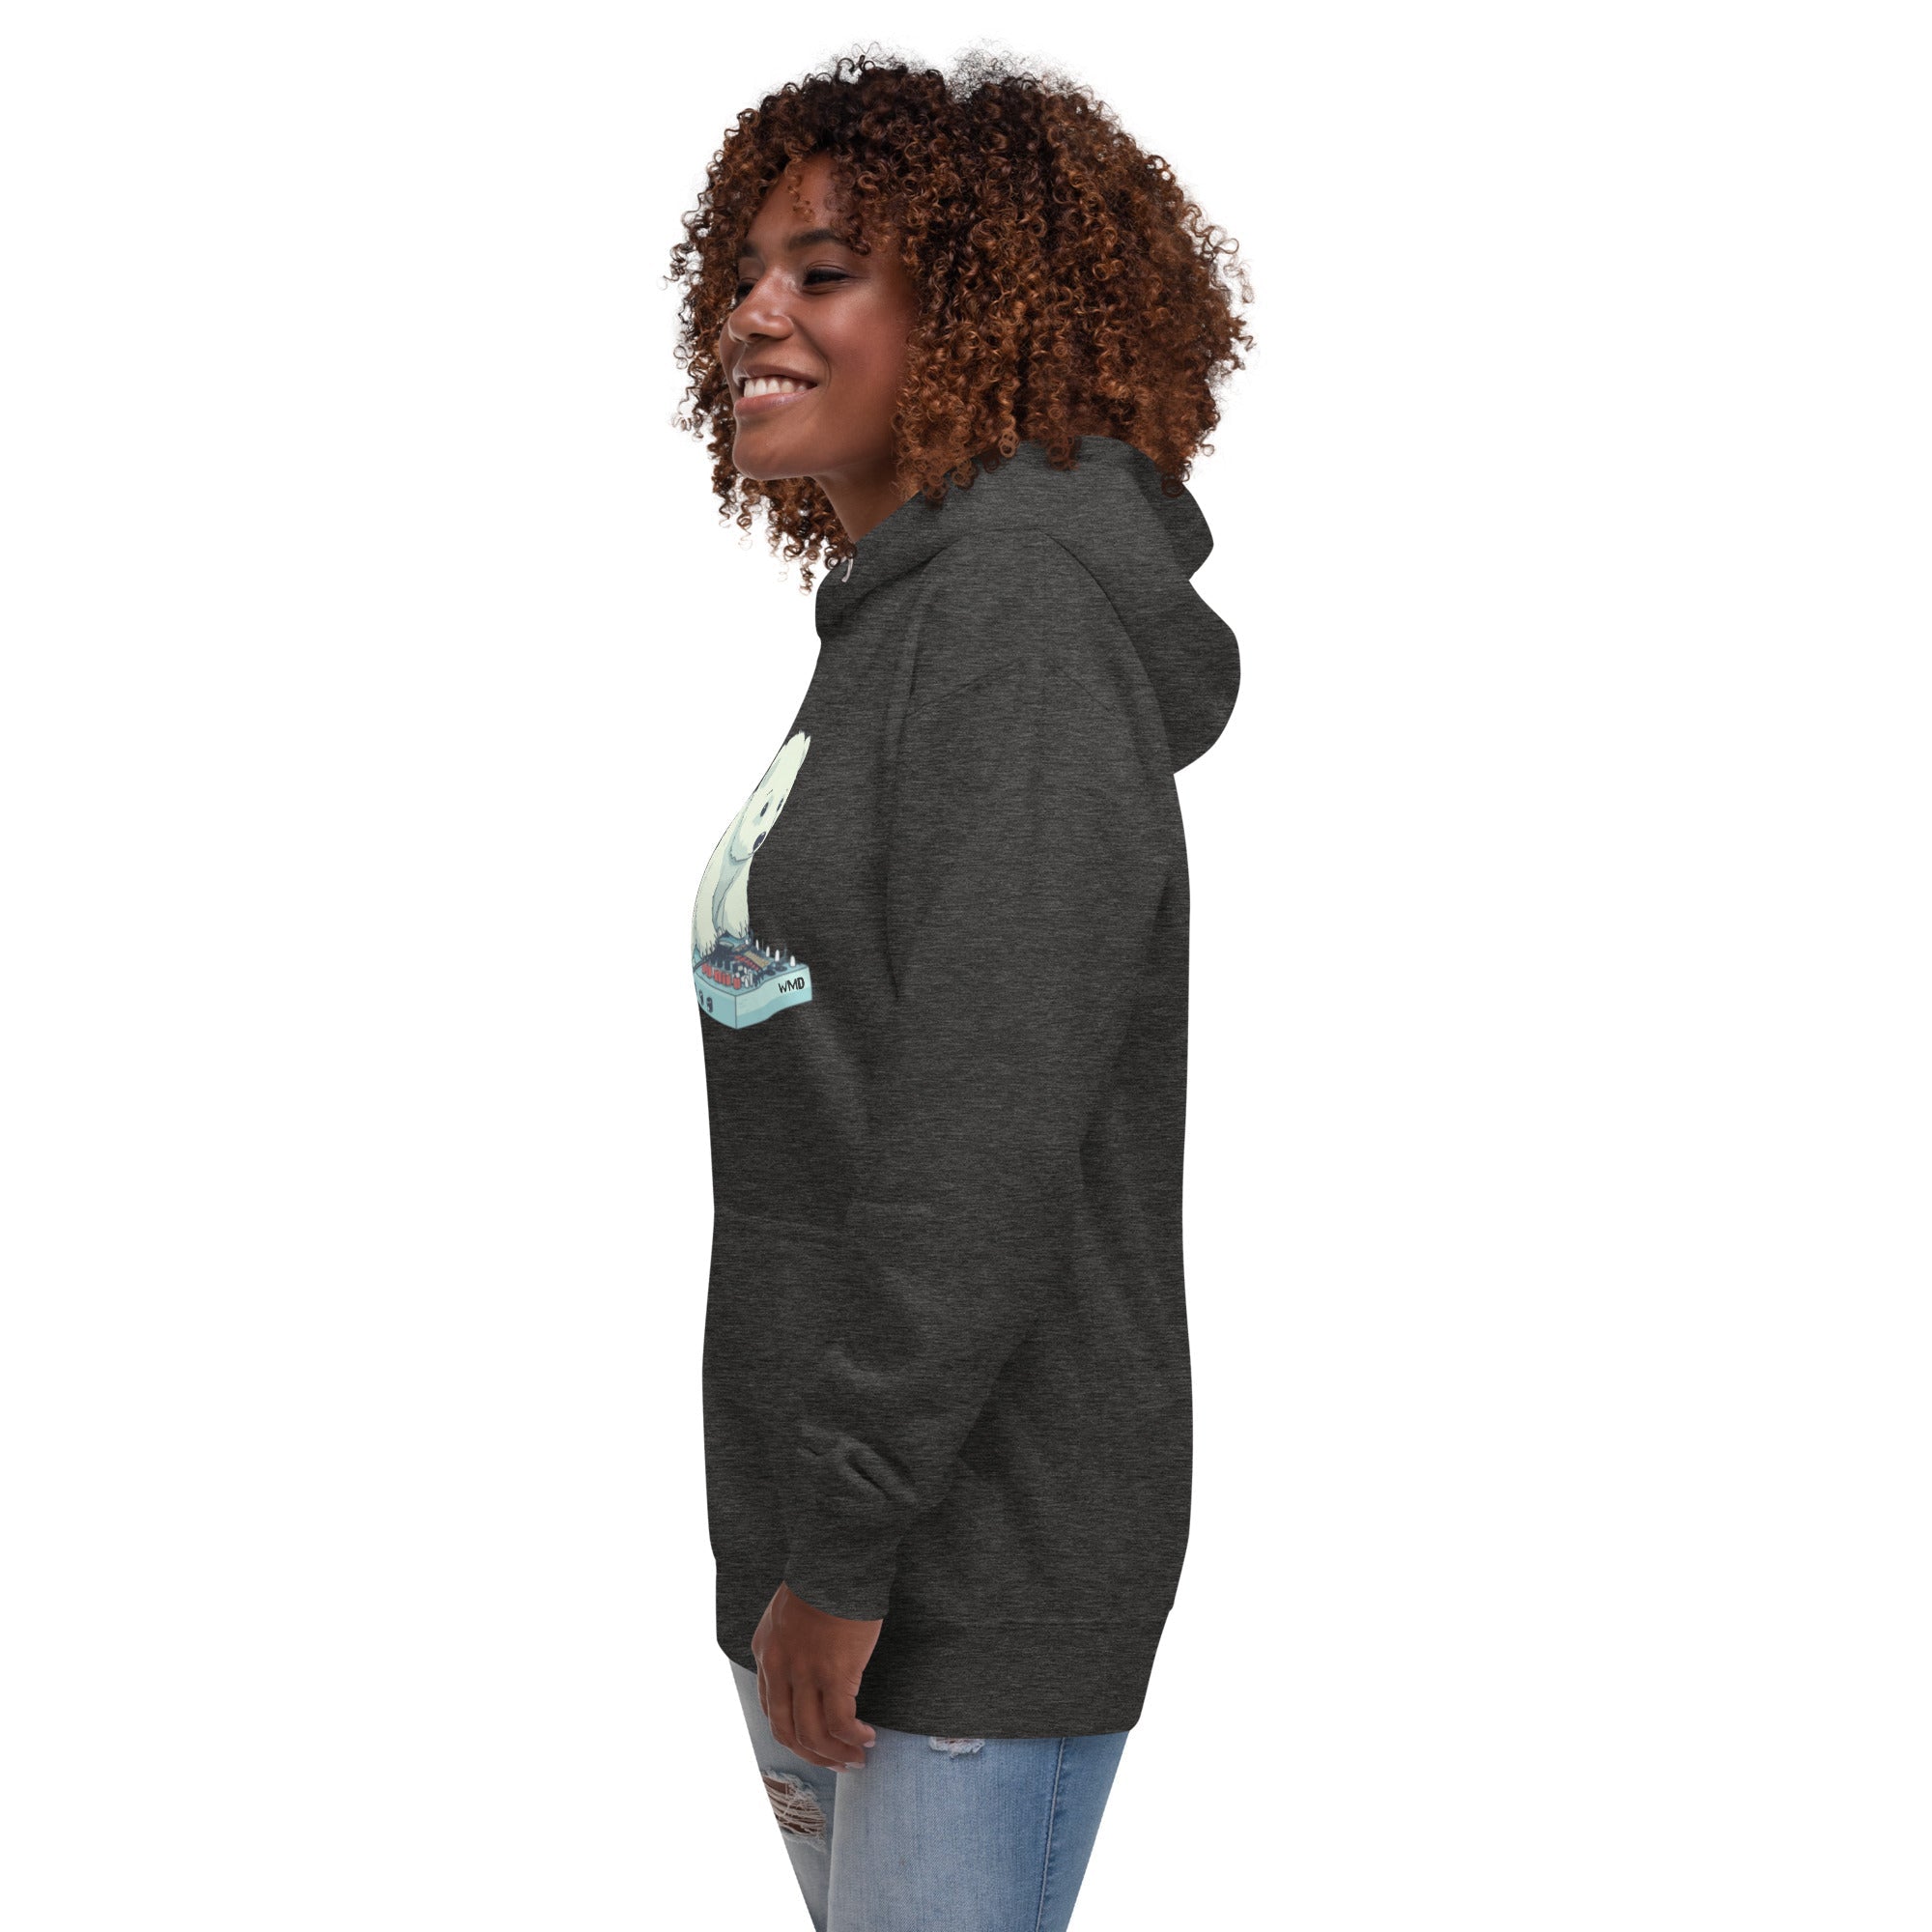 WMD - Hoodie - Learning to Patch Polarbear Hoodie - WMD - Charcoal Heather - Hoodie - -